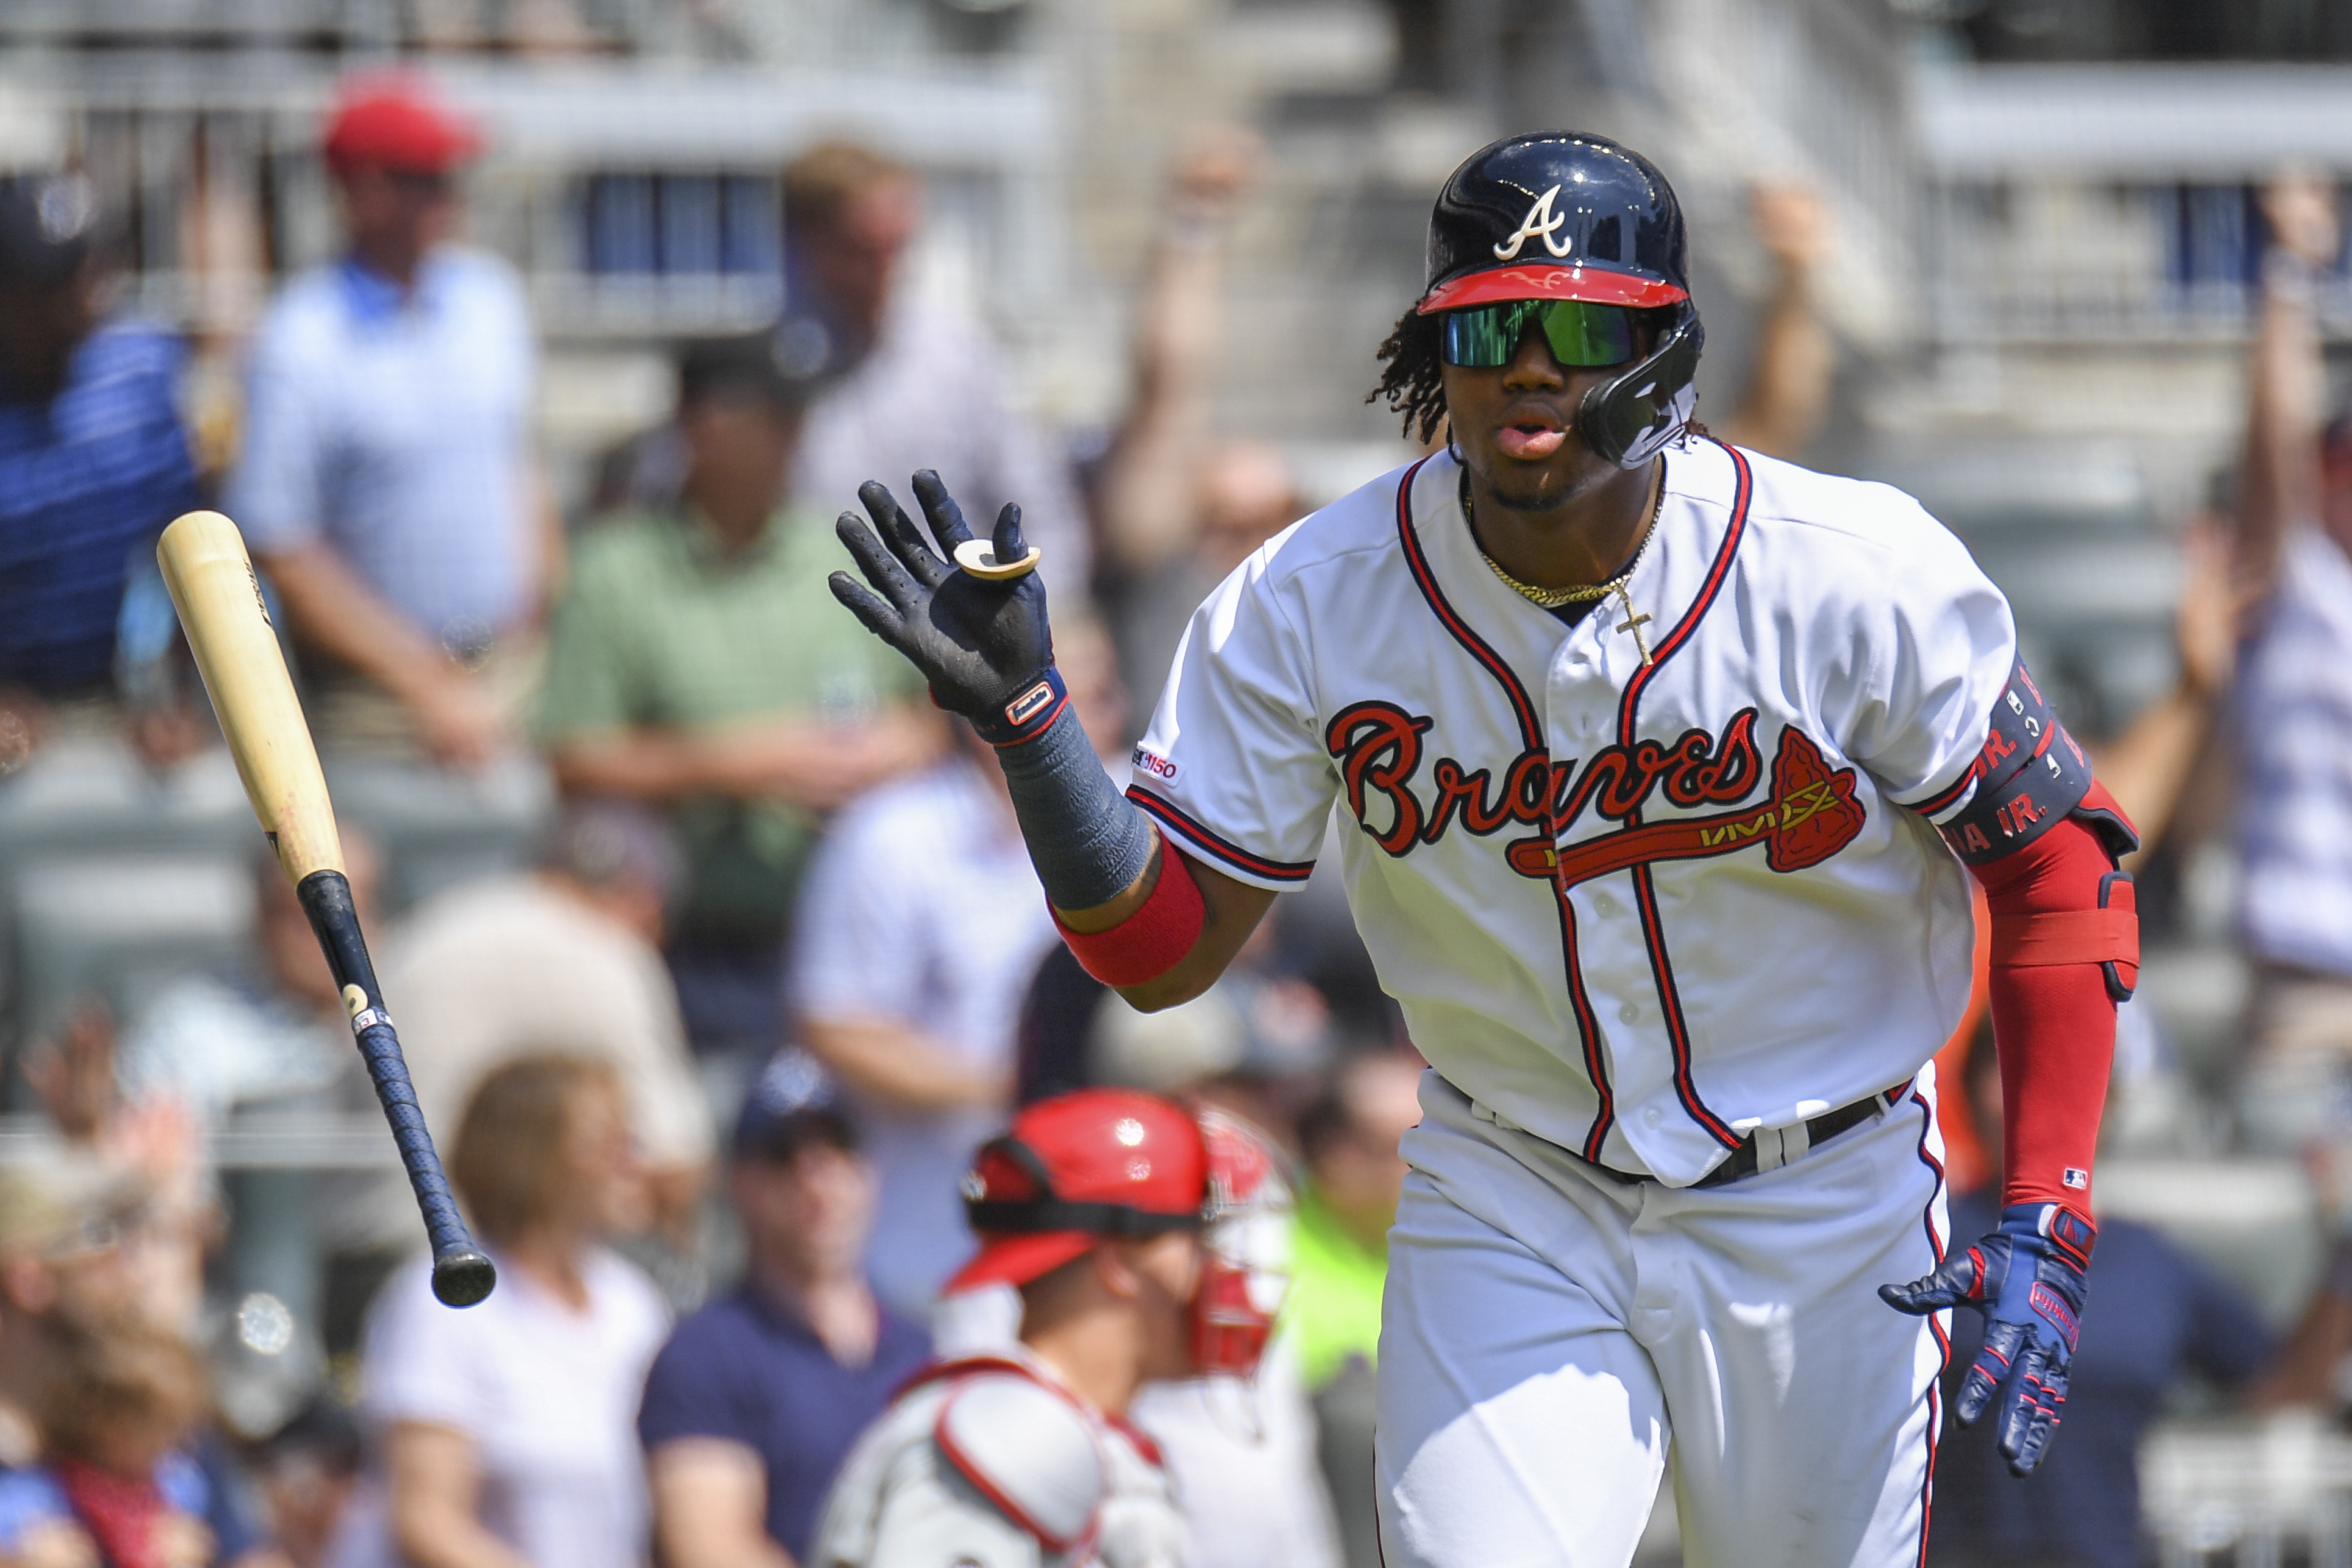 Ronald Acuna second youngest Major League Baseball player to